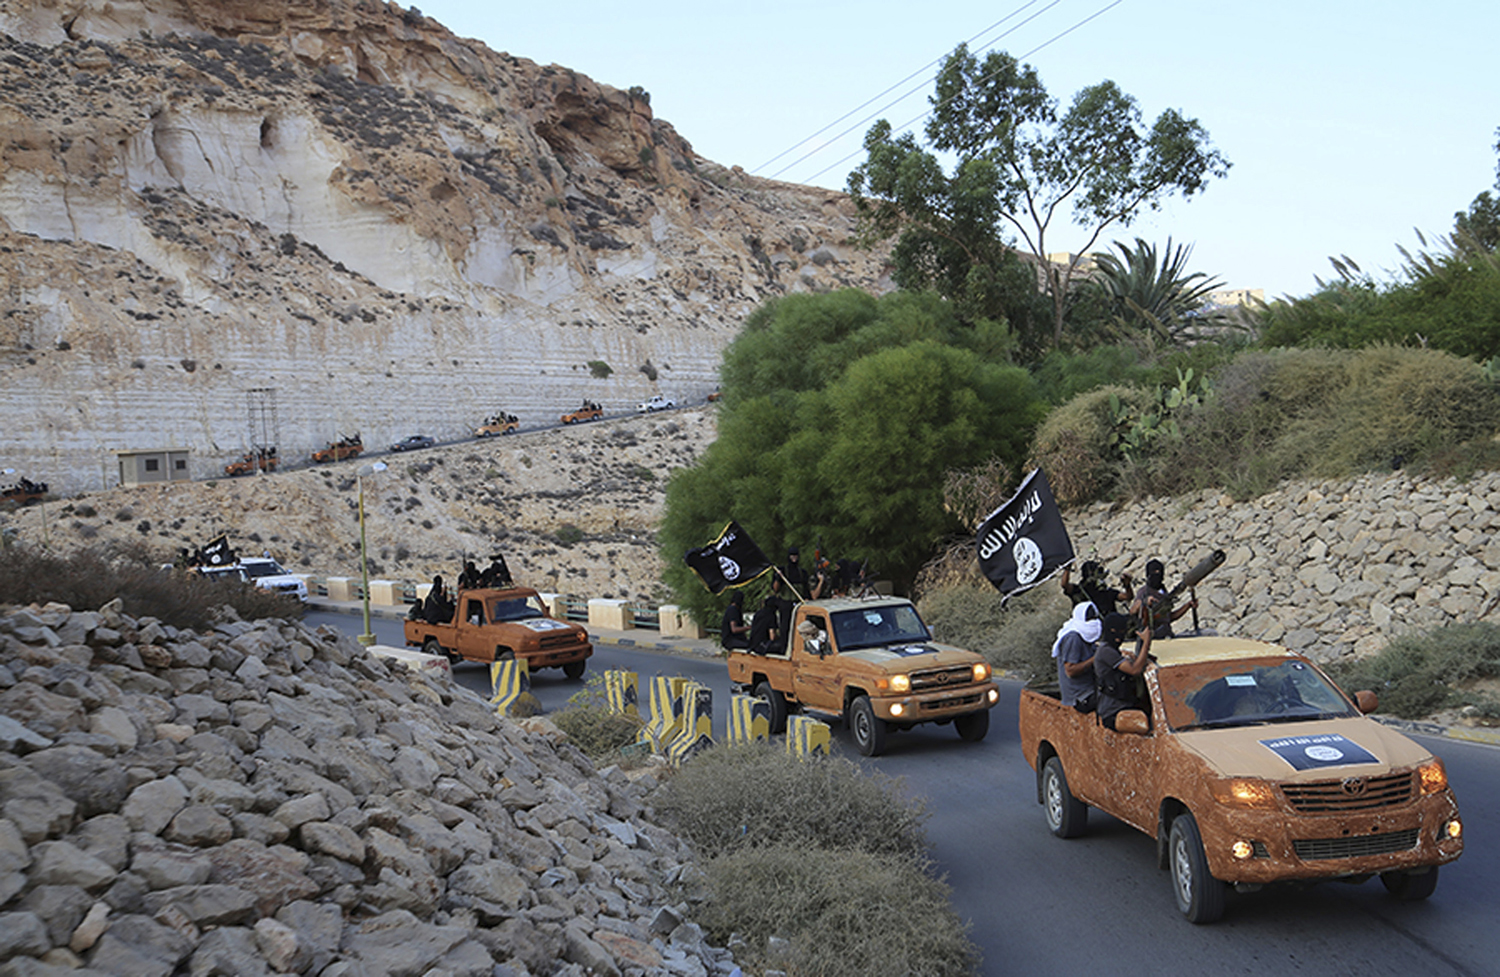 An armed motorcade belonging to members of Derna's Islamic Youth Council, consisting of former members of militias from the town of Derna, drive along a road in Derna, eastern Libya